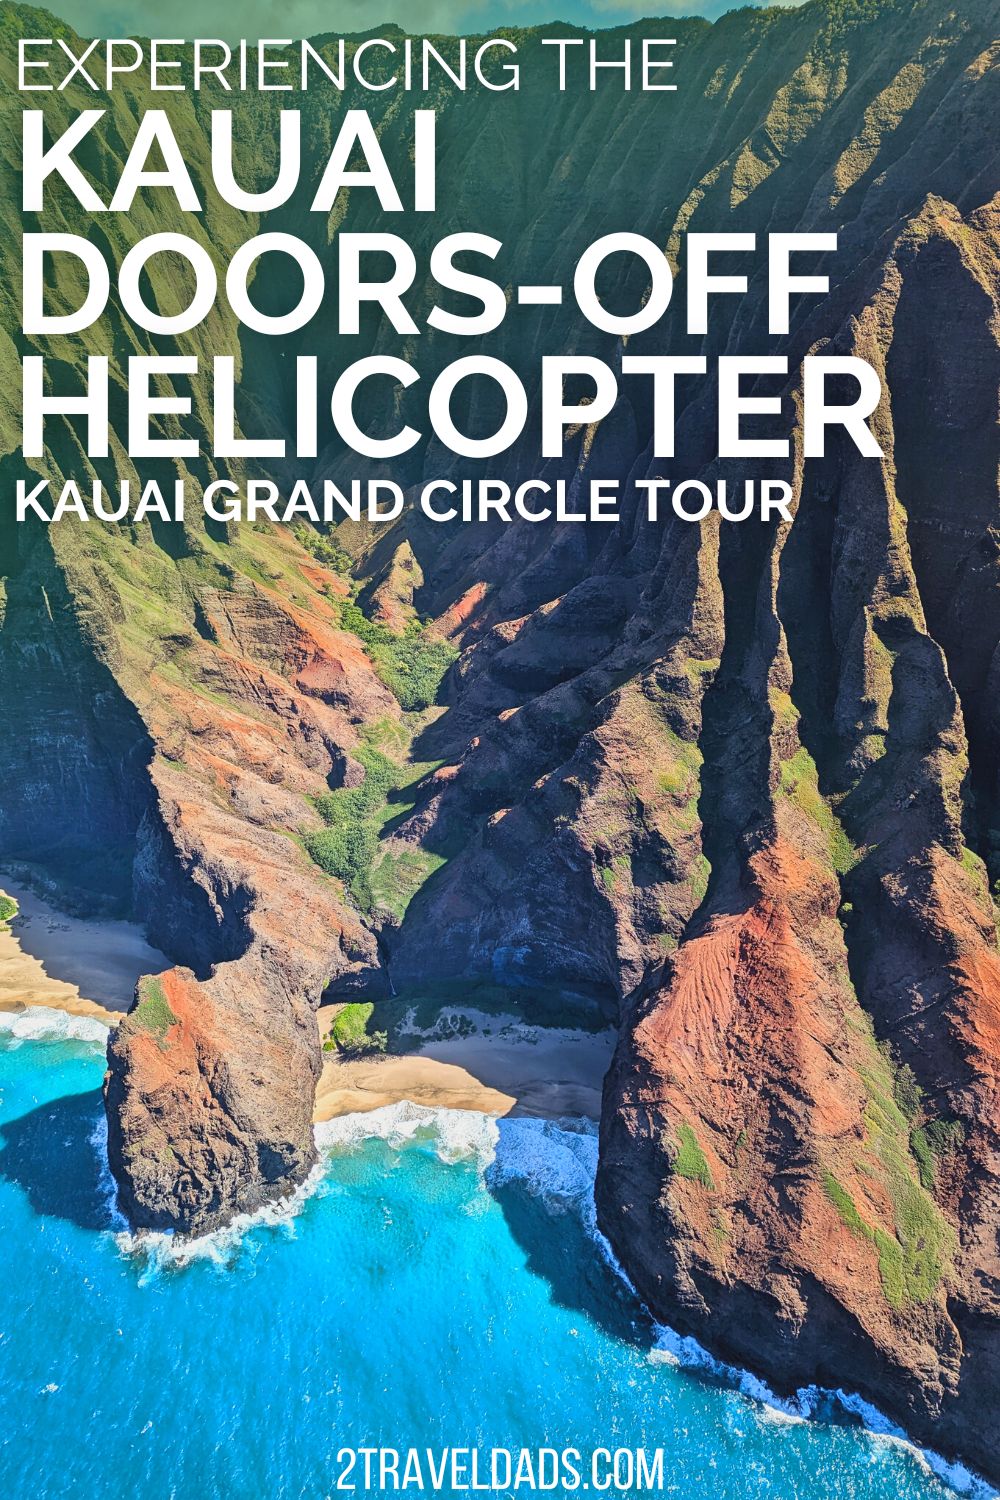 One of the most popular things to do on Kauai, the Doors-off Helicopter tour going around the whole island is amazing. Seeing the Garden Island from the air, find out everything you need to know for planning this unforgettable tour.